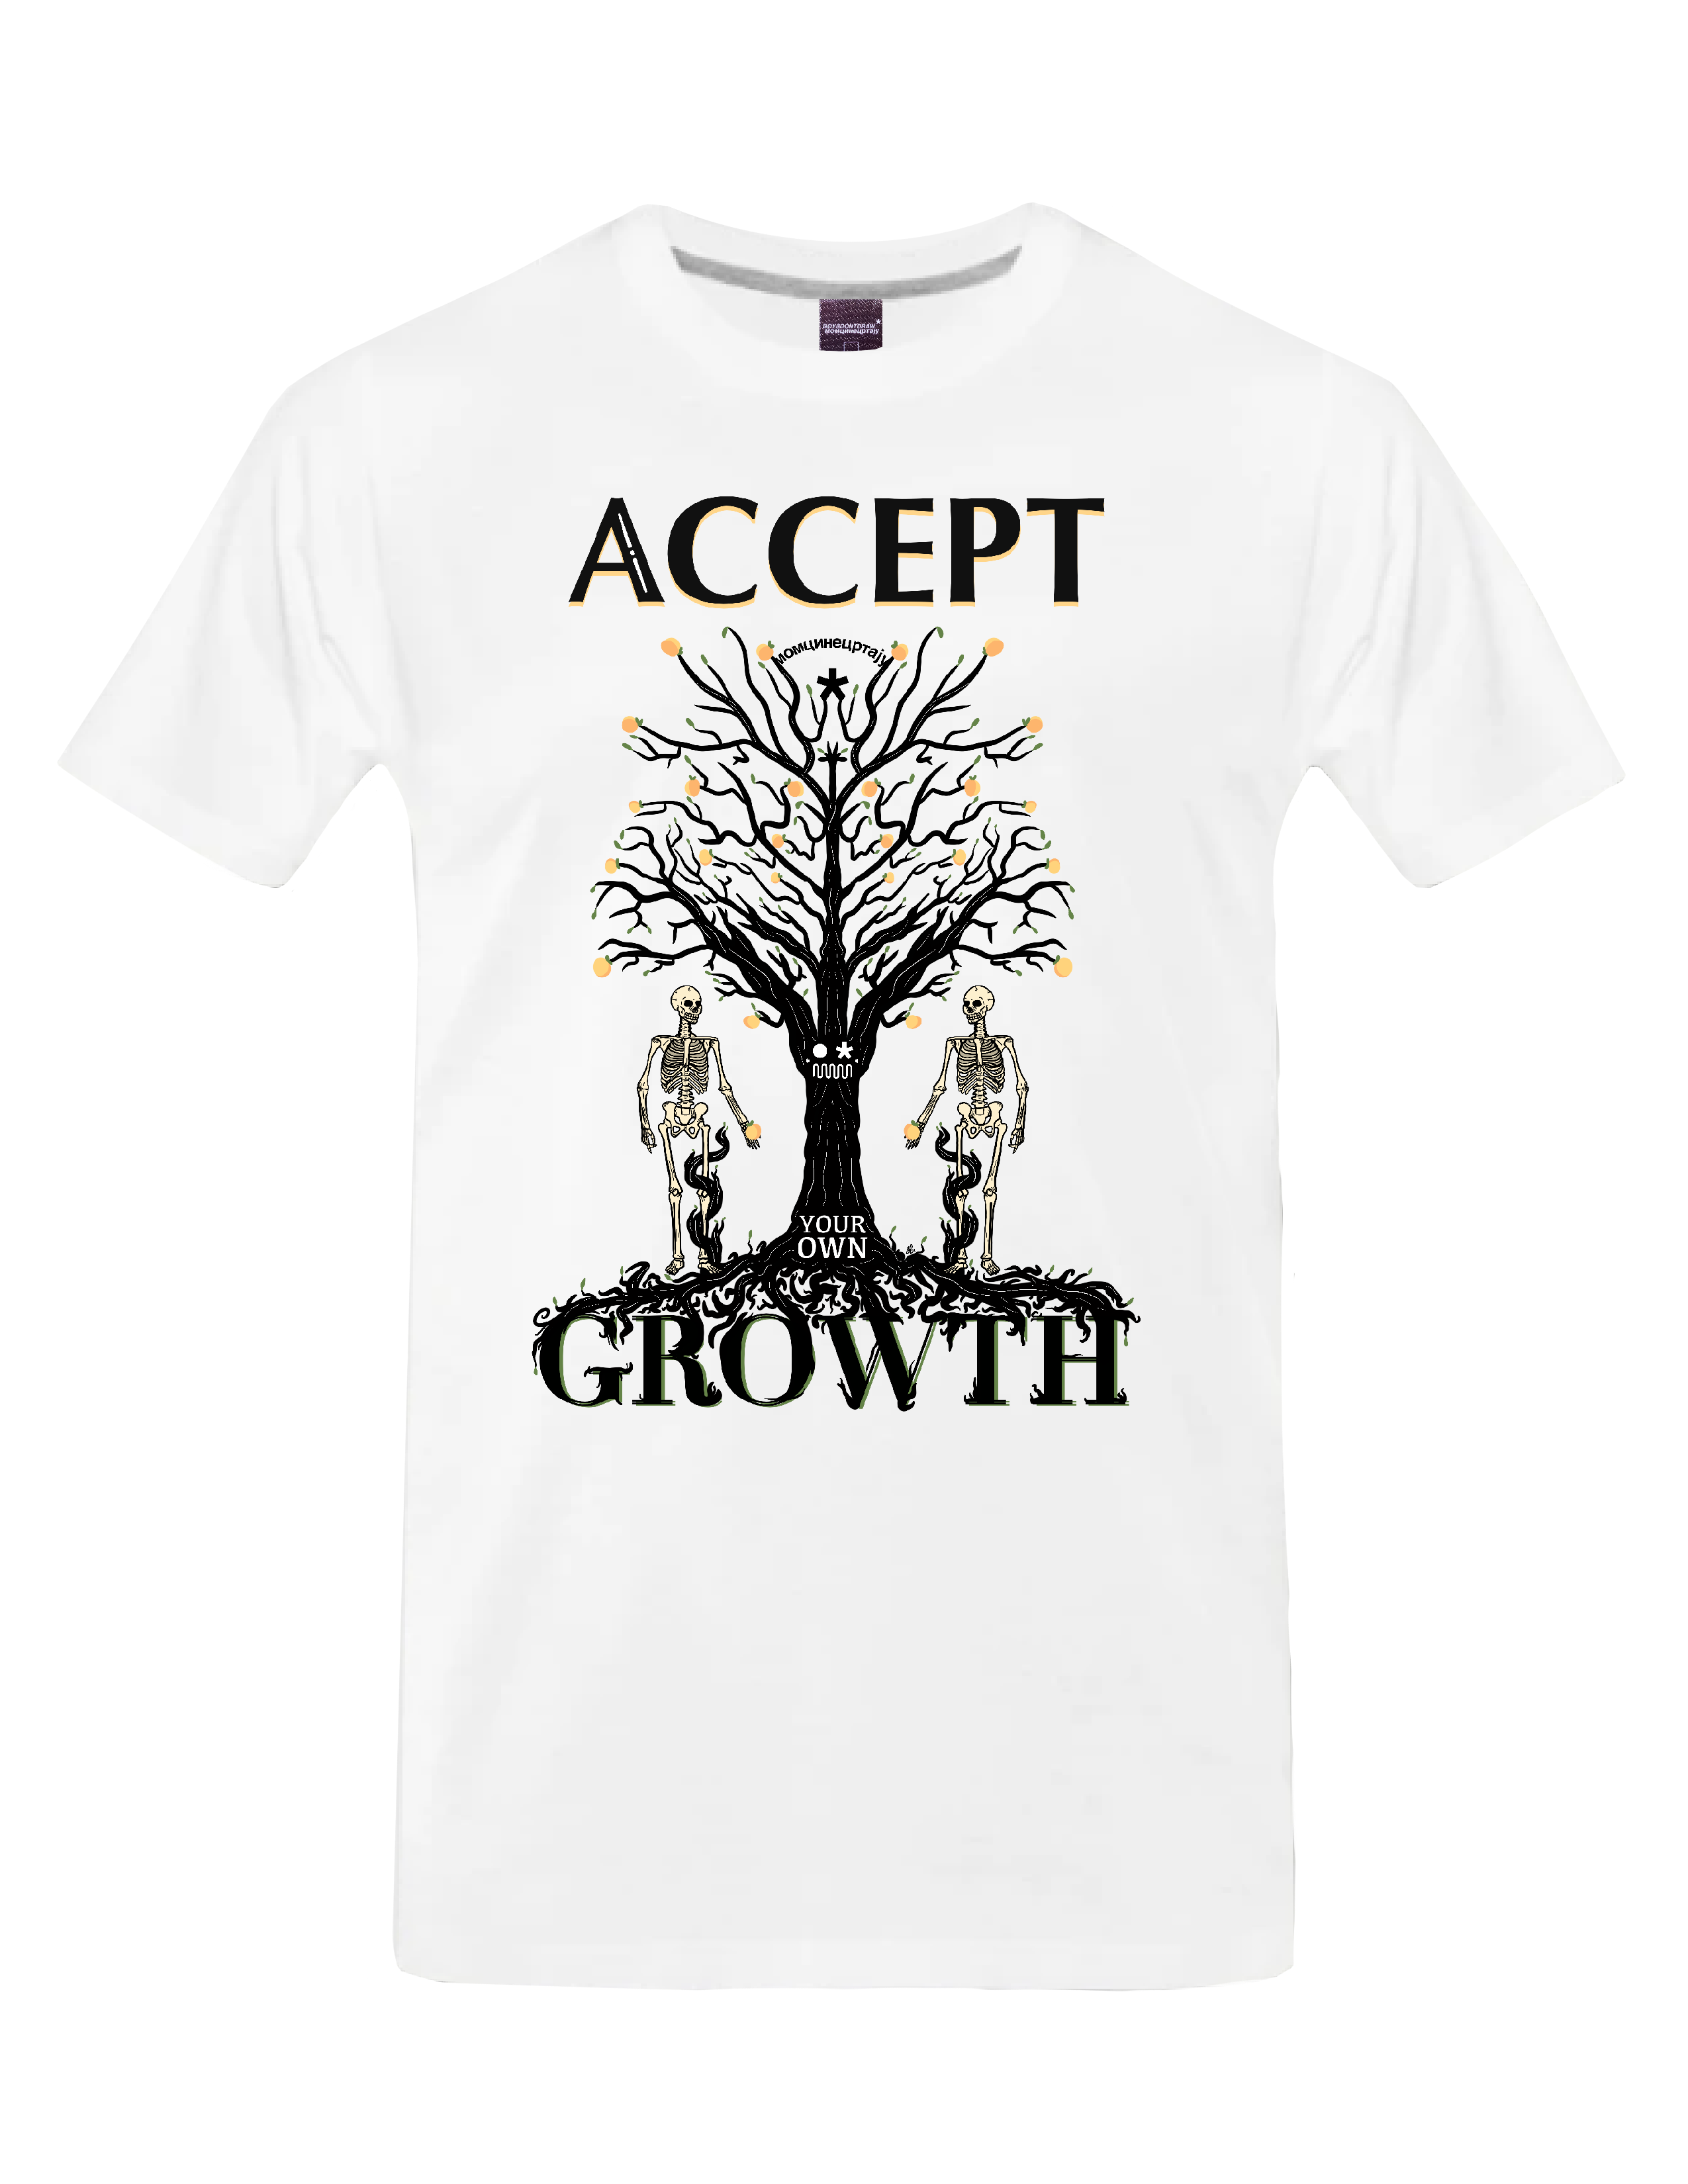 AFFIRMATION - ACCEPT YOUR OWN GROWTH (White) - T-Shirt by BOYSDONTDRAW